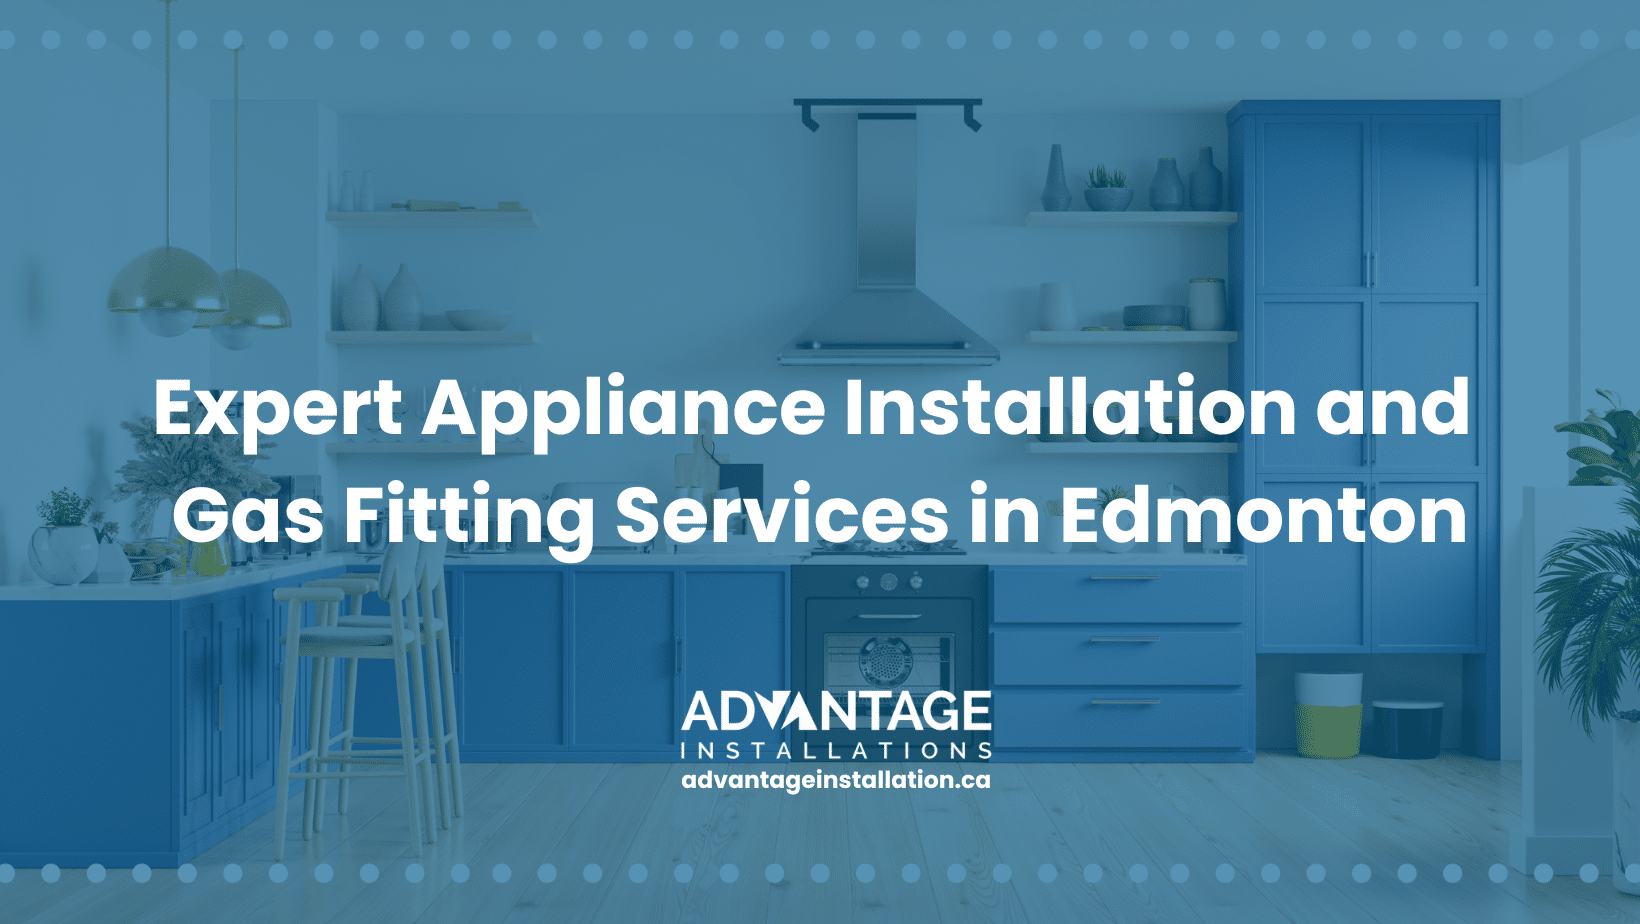 Expert Appliance Installation and Gas Fitting Services in Edmonton